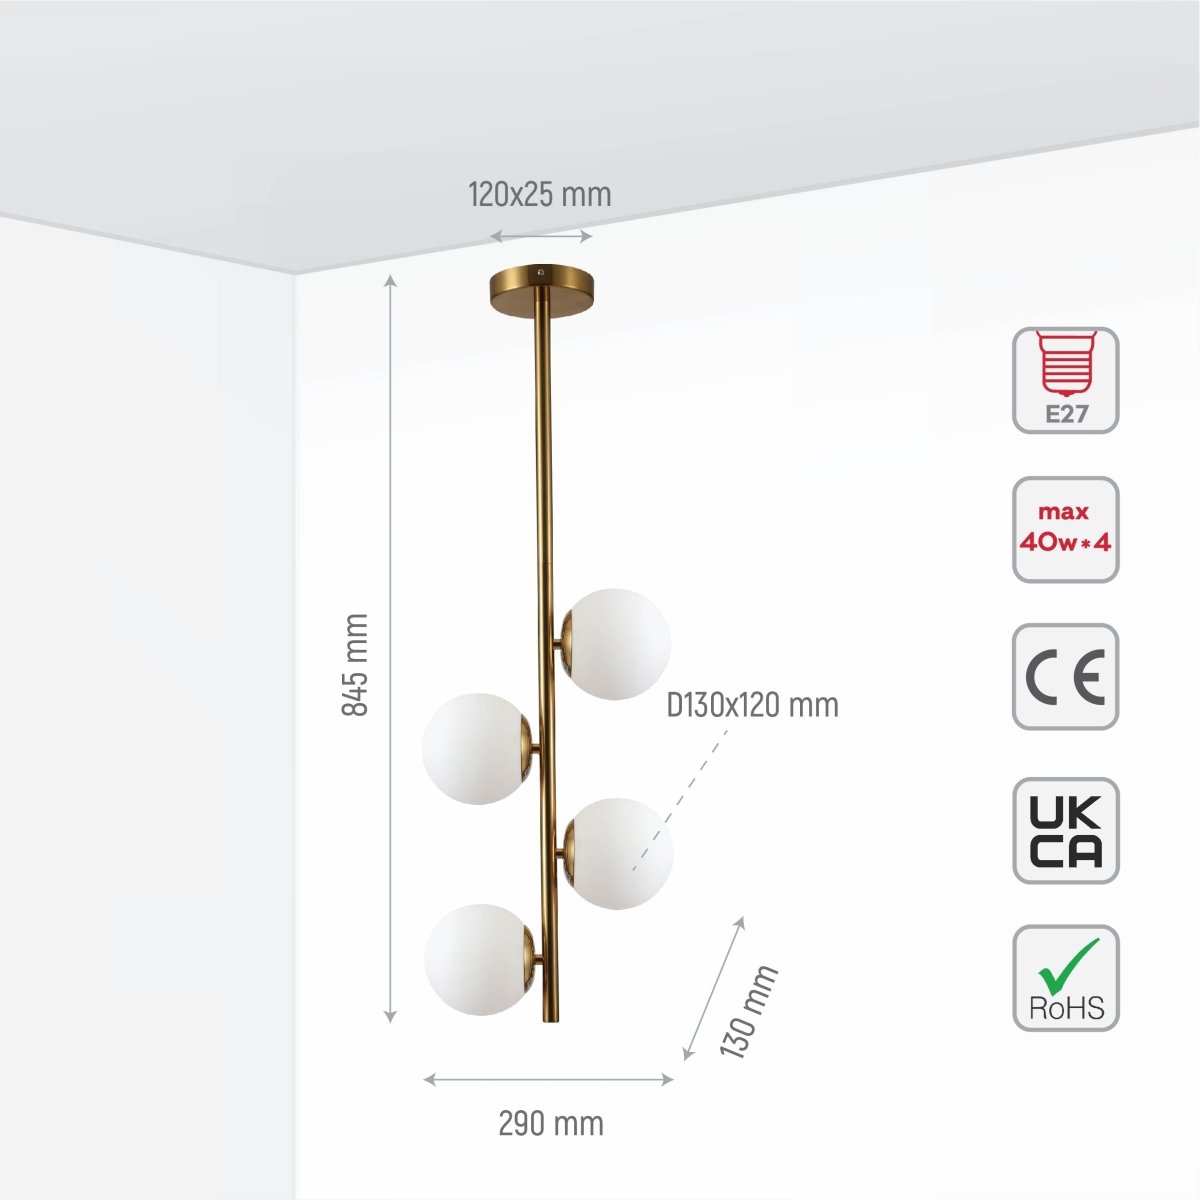 Size and specs of Vertical Opal Globes Gold Metal Body Ceiling light with 4xE27 Fittings | TEKLED 156-19512